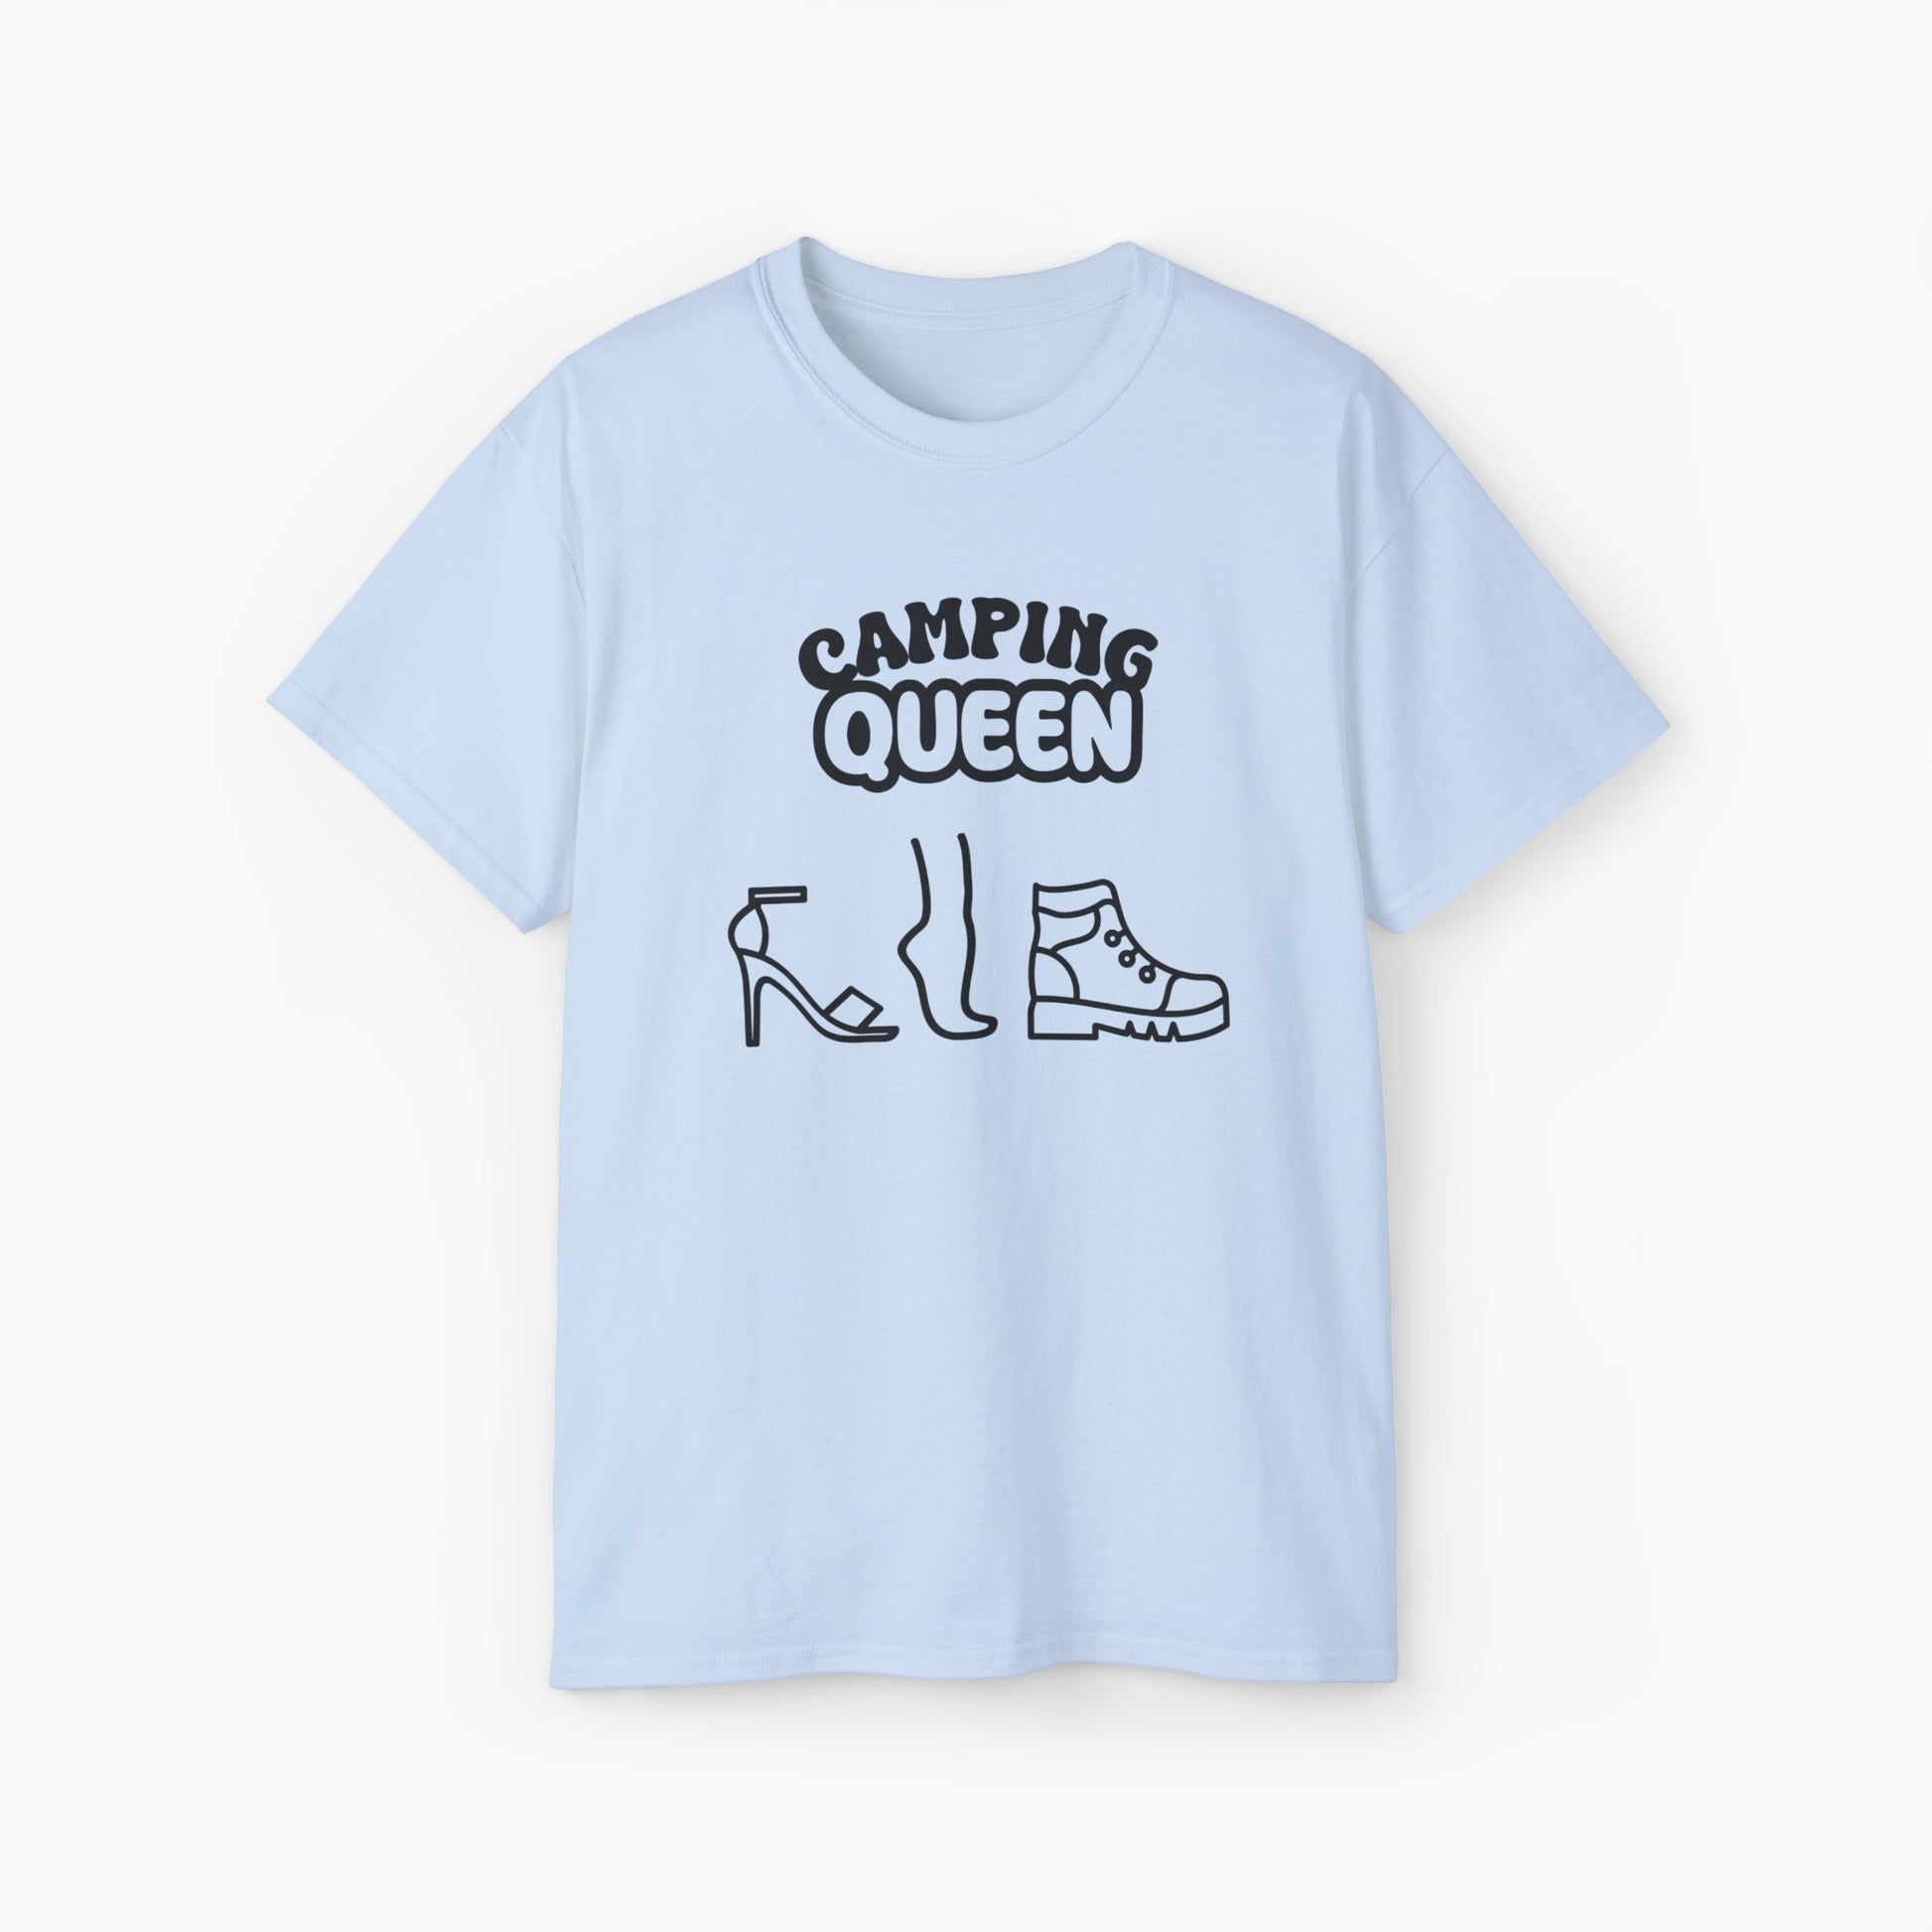 Ligh blue t-shirt with 'Camping Queen' text, illustrated with a high heel, a foot, and a boot, on a plain background.